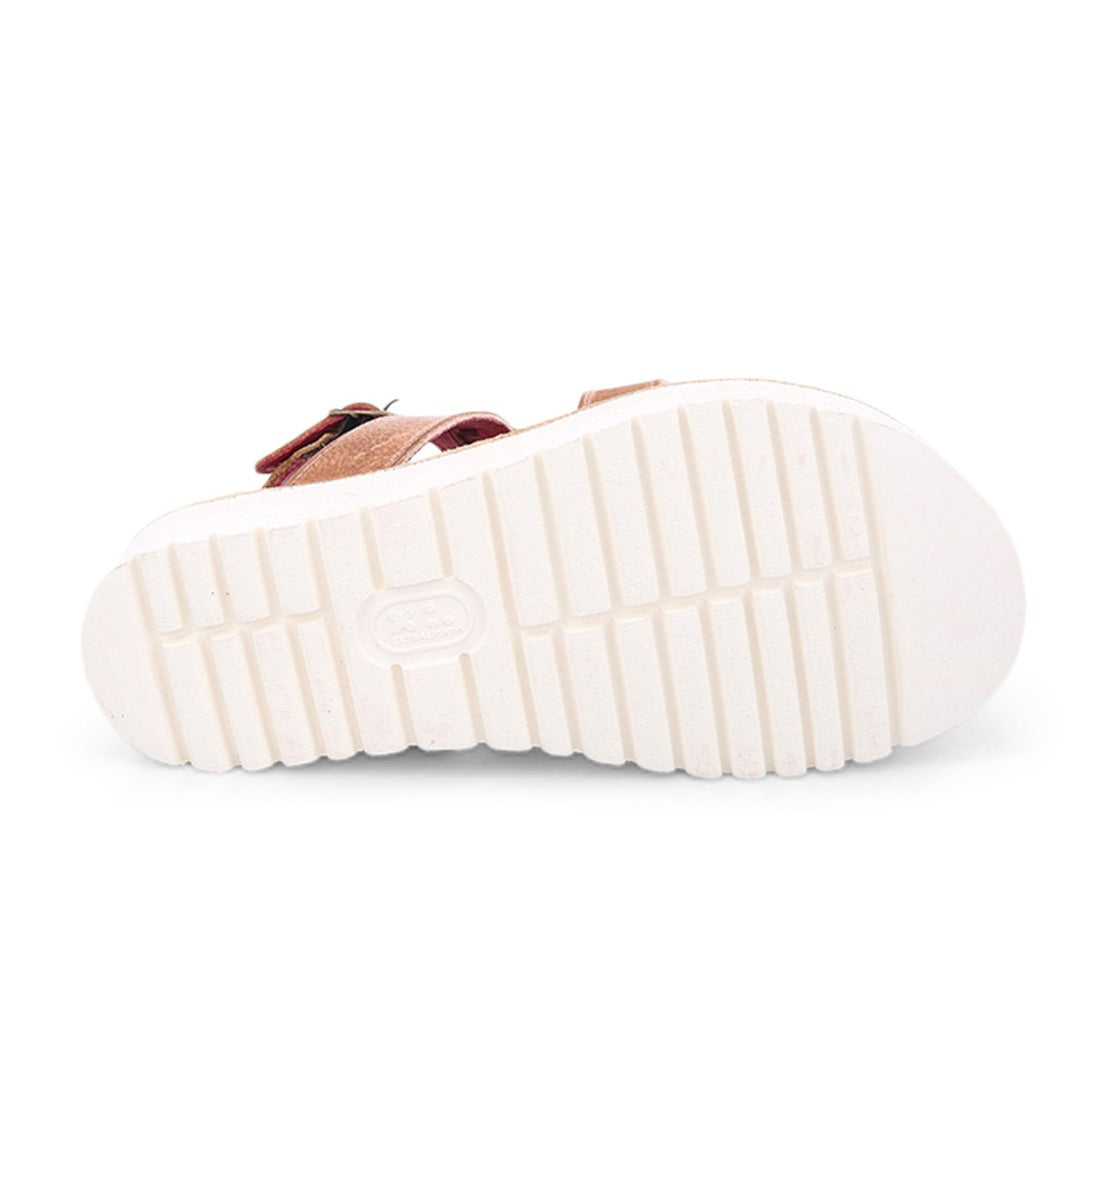 A pair of Bed Stu Crawler women's sandals on a white background.